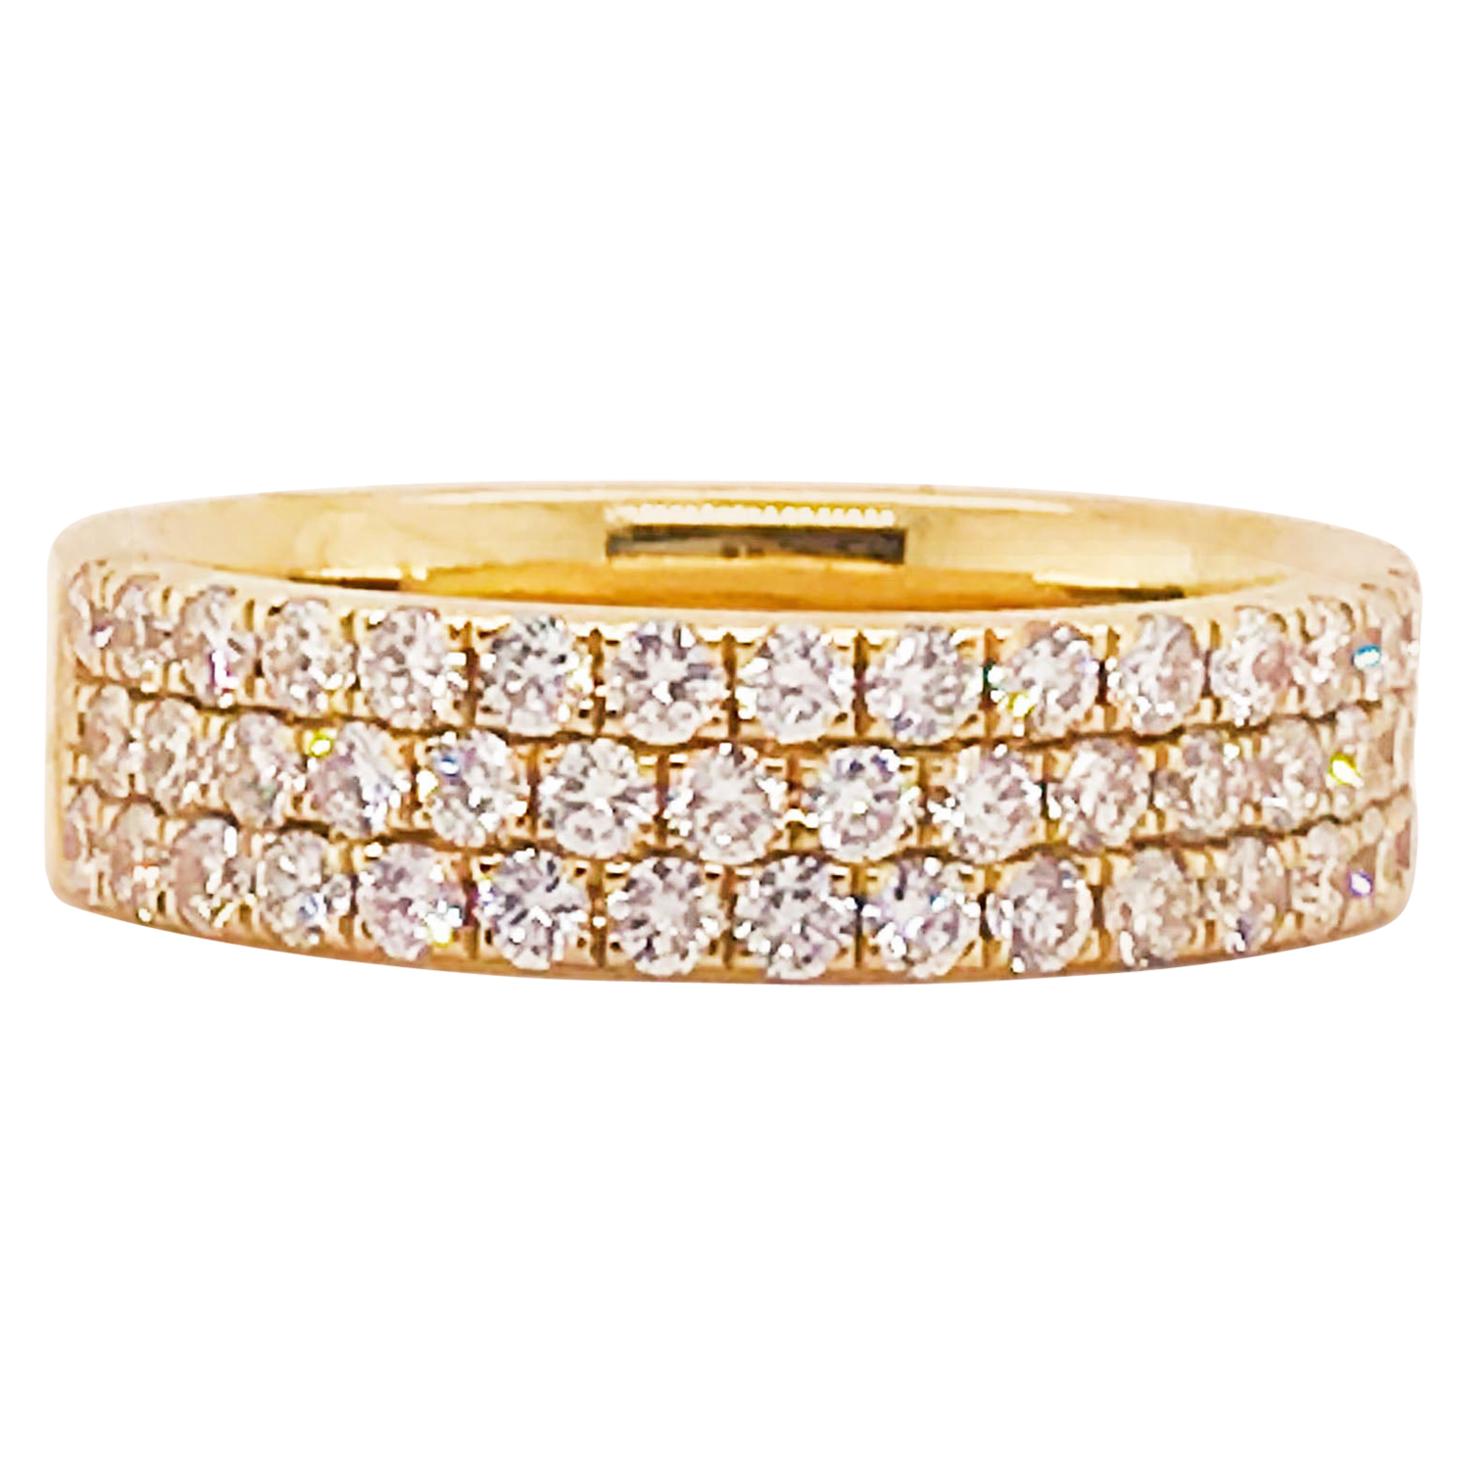 Wide Pave Band Ring in 14 Karat Yellow Gold with 1 Carat Diamonds